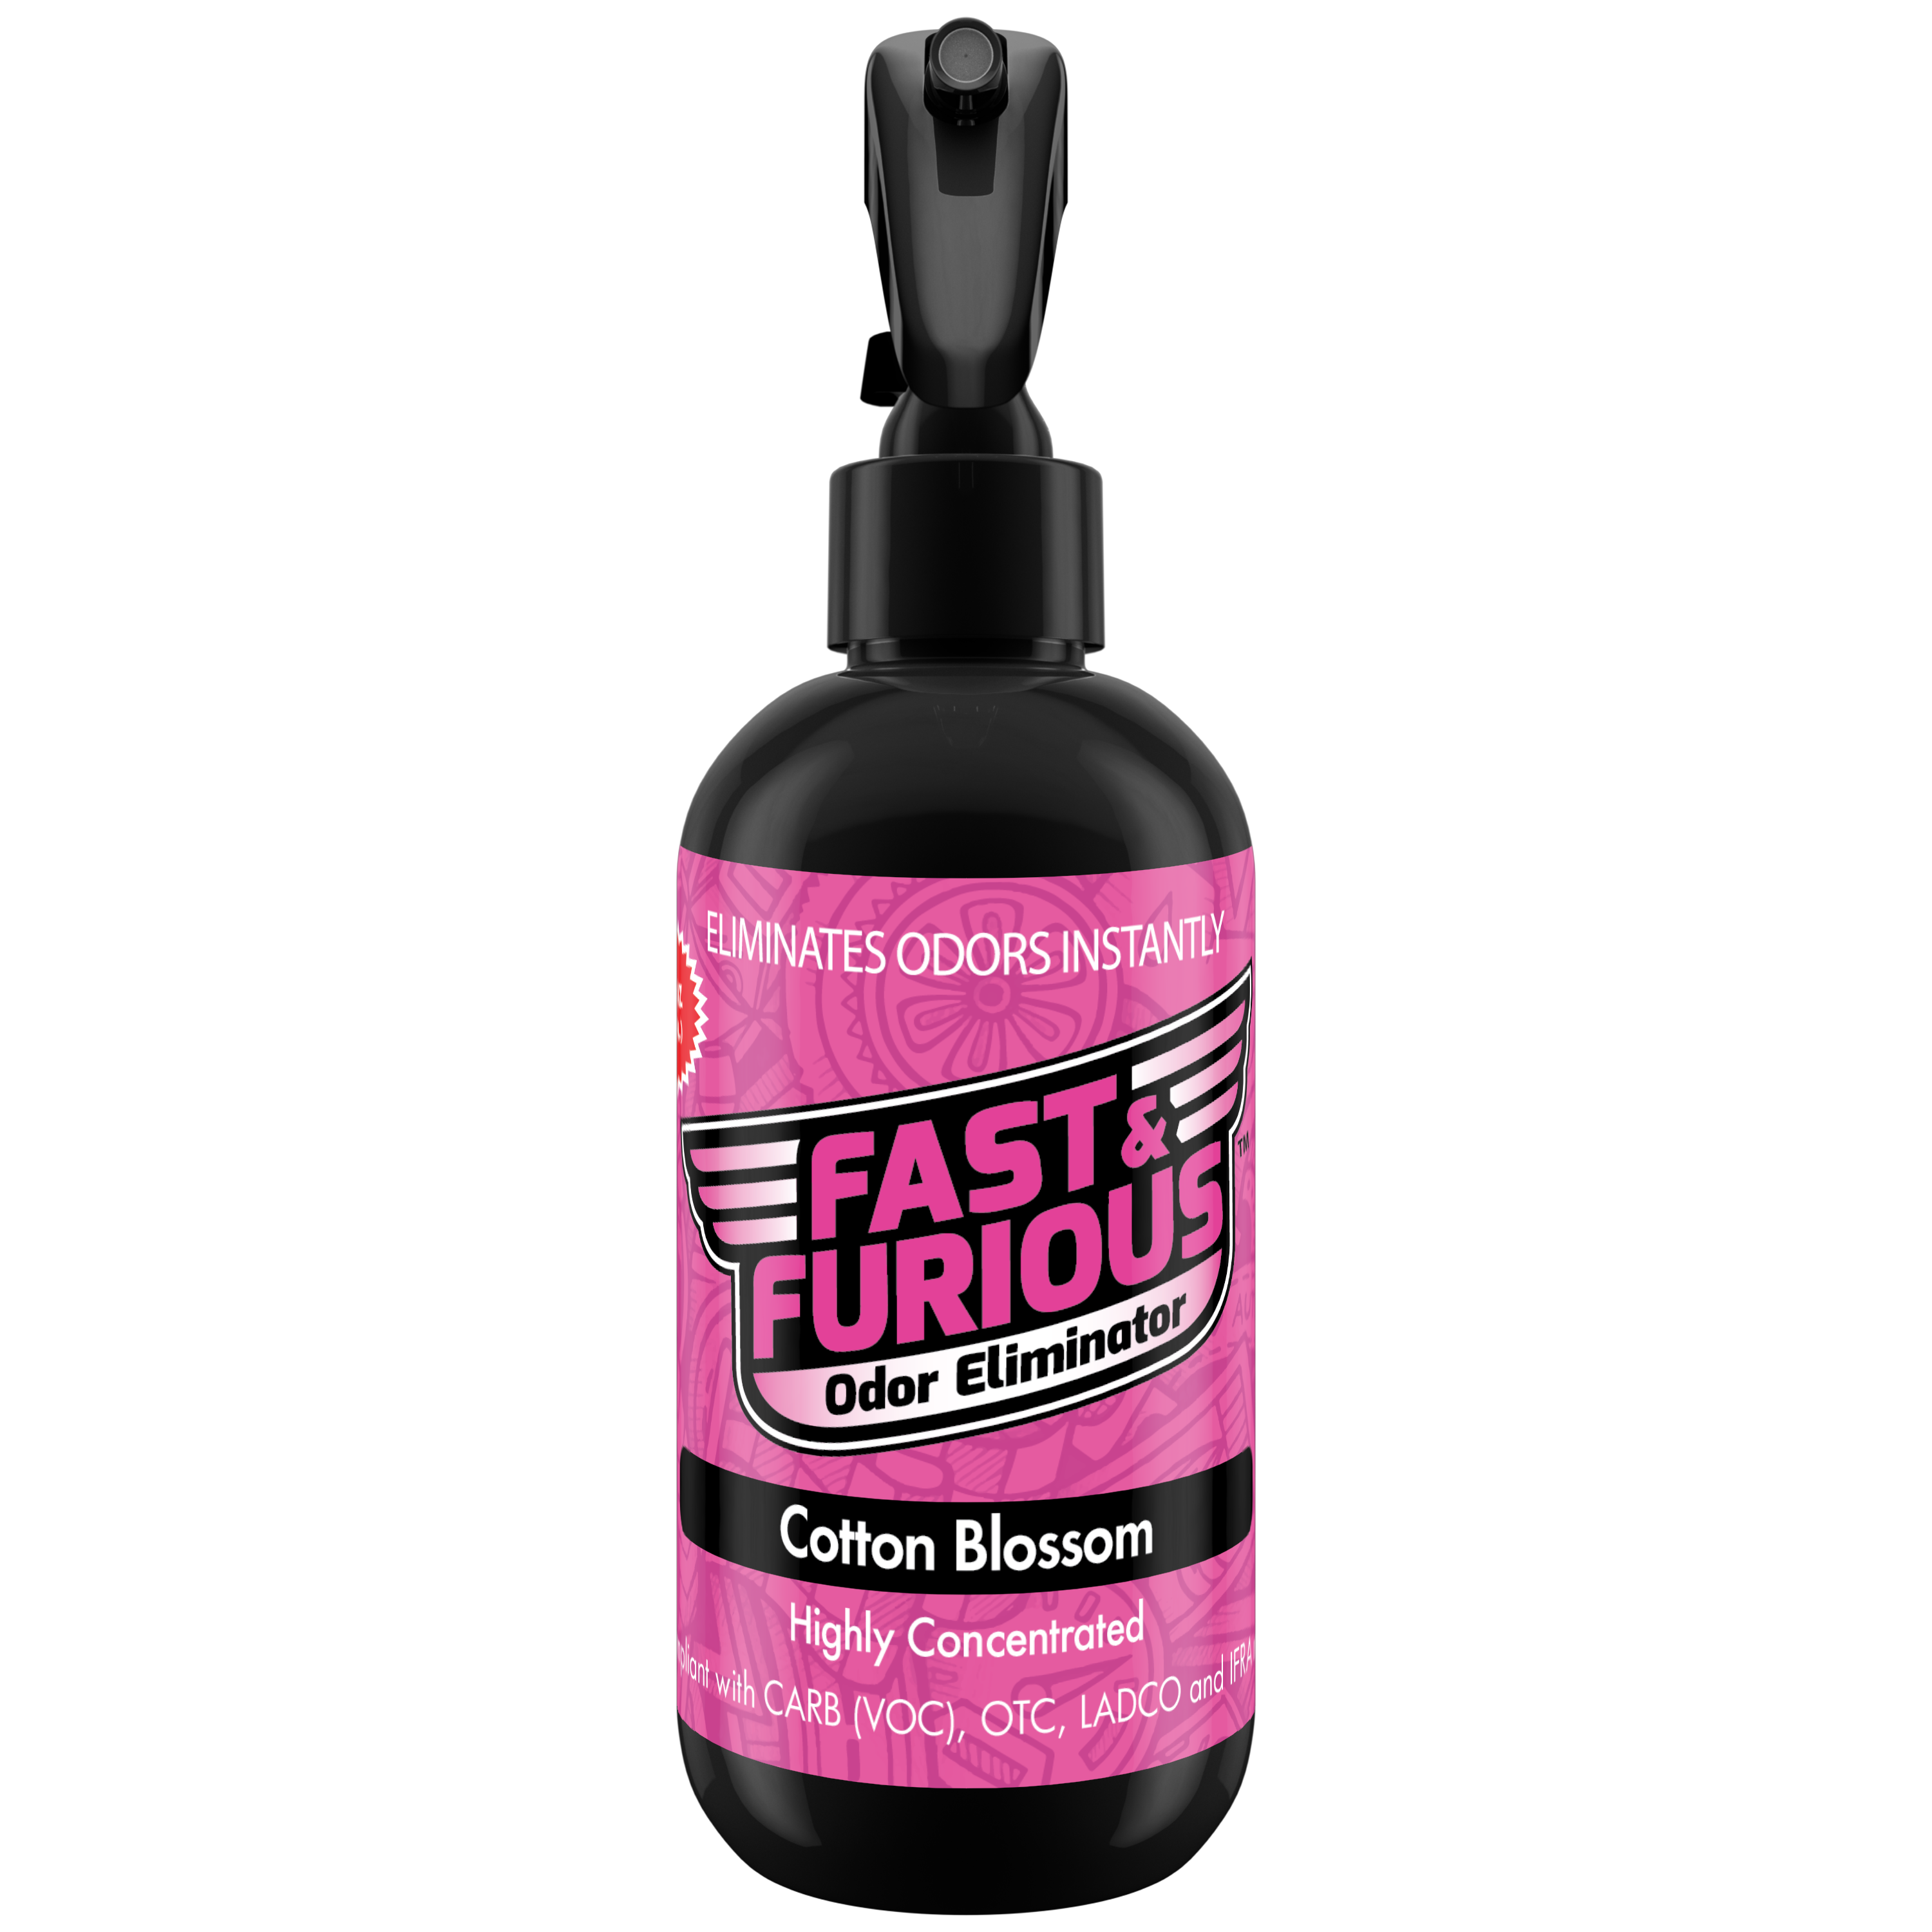 Fast and Furious Odor Eliminator - Cotton Blossom Scent